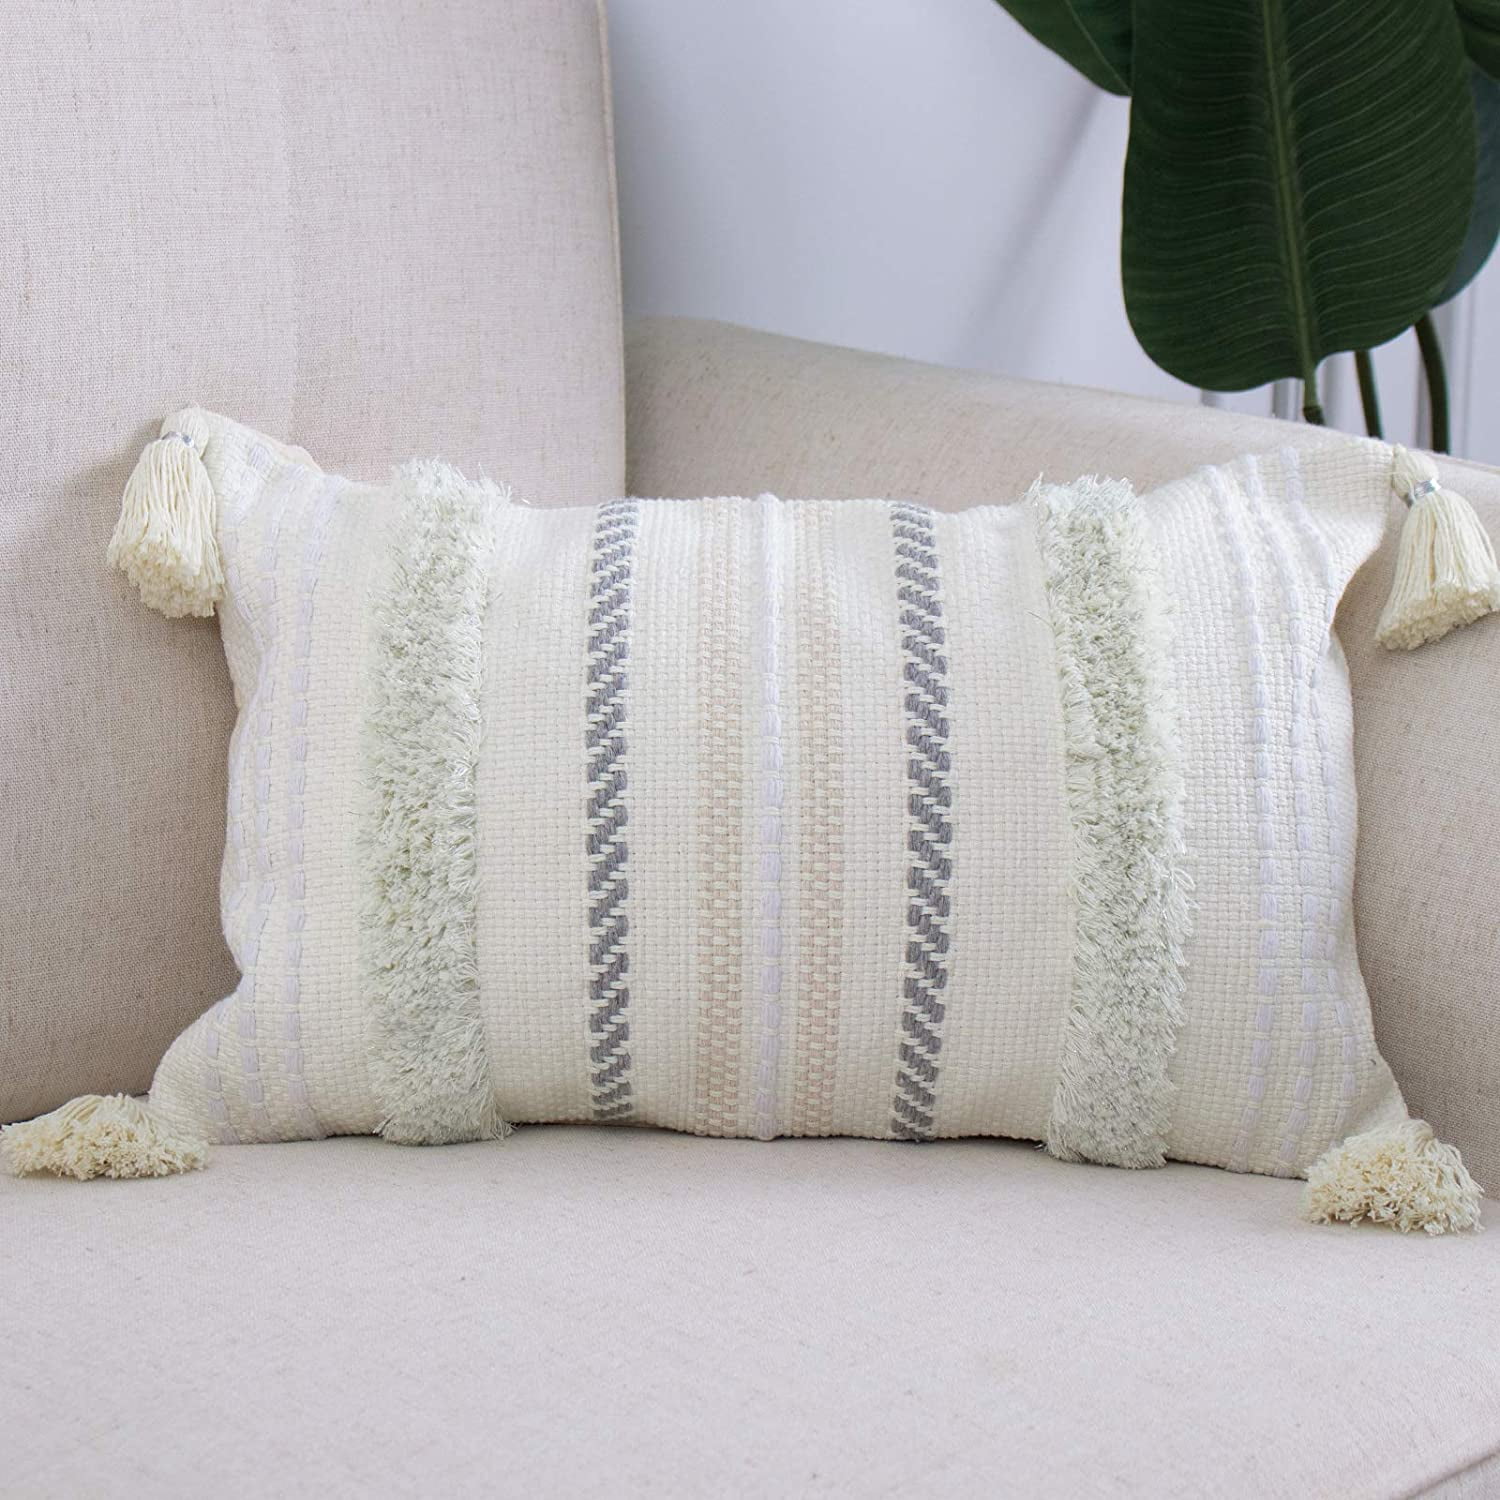 Woven Tufted Boho Cushion Cover with Tassels Lumbar Small Decorative Throw Pillow Covers for Couch Sofa Bedroom Living Room 12X20 inch, Blue Cute Farmhouse Pillows Case